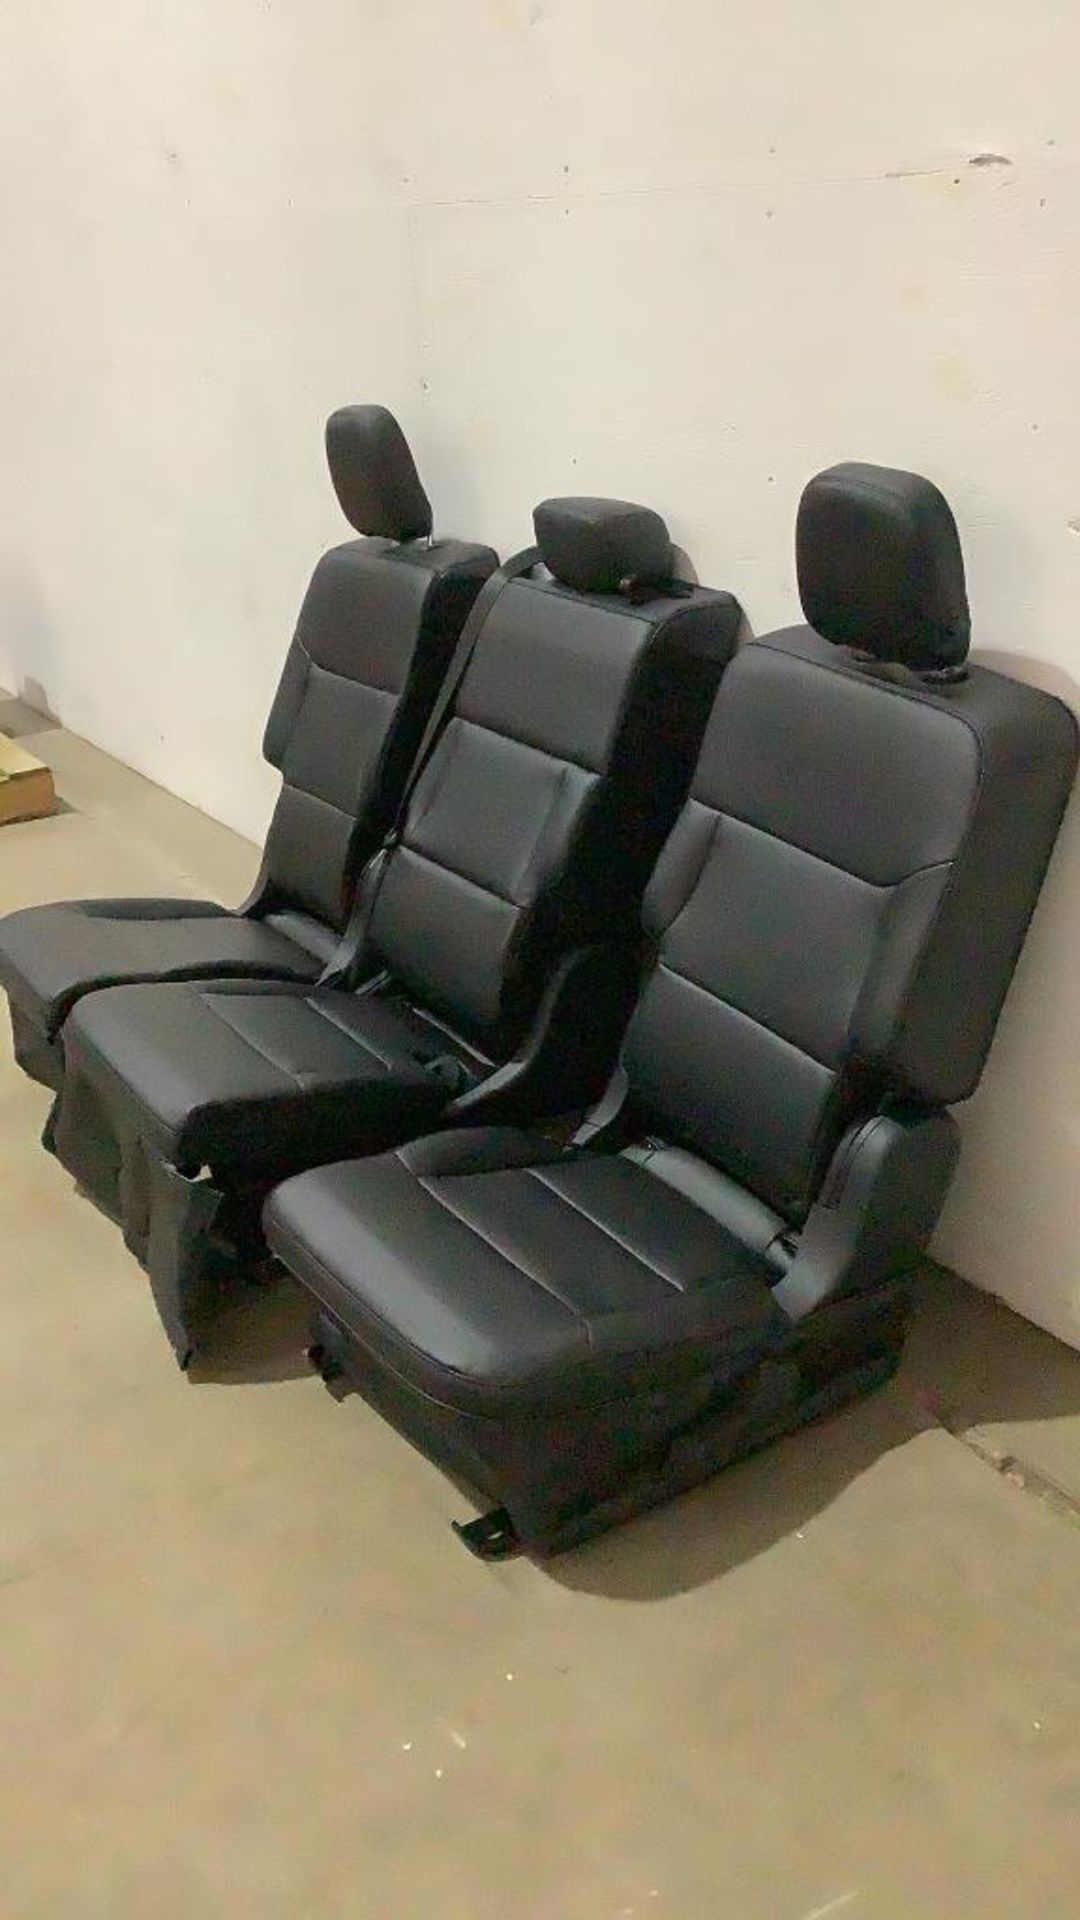 2020 Ford Explorer Set of Rear Seats - Image 10 of 12